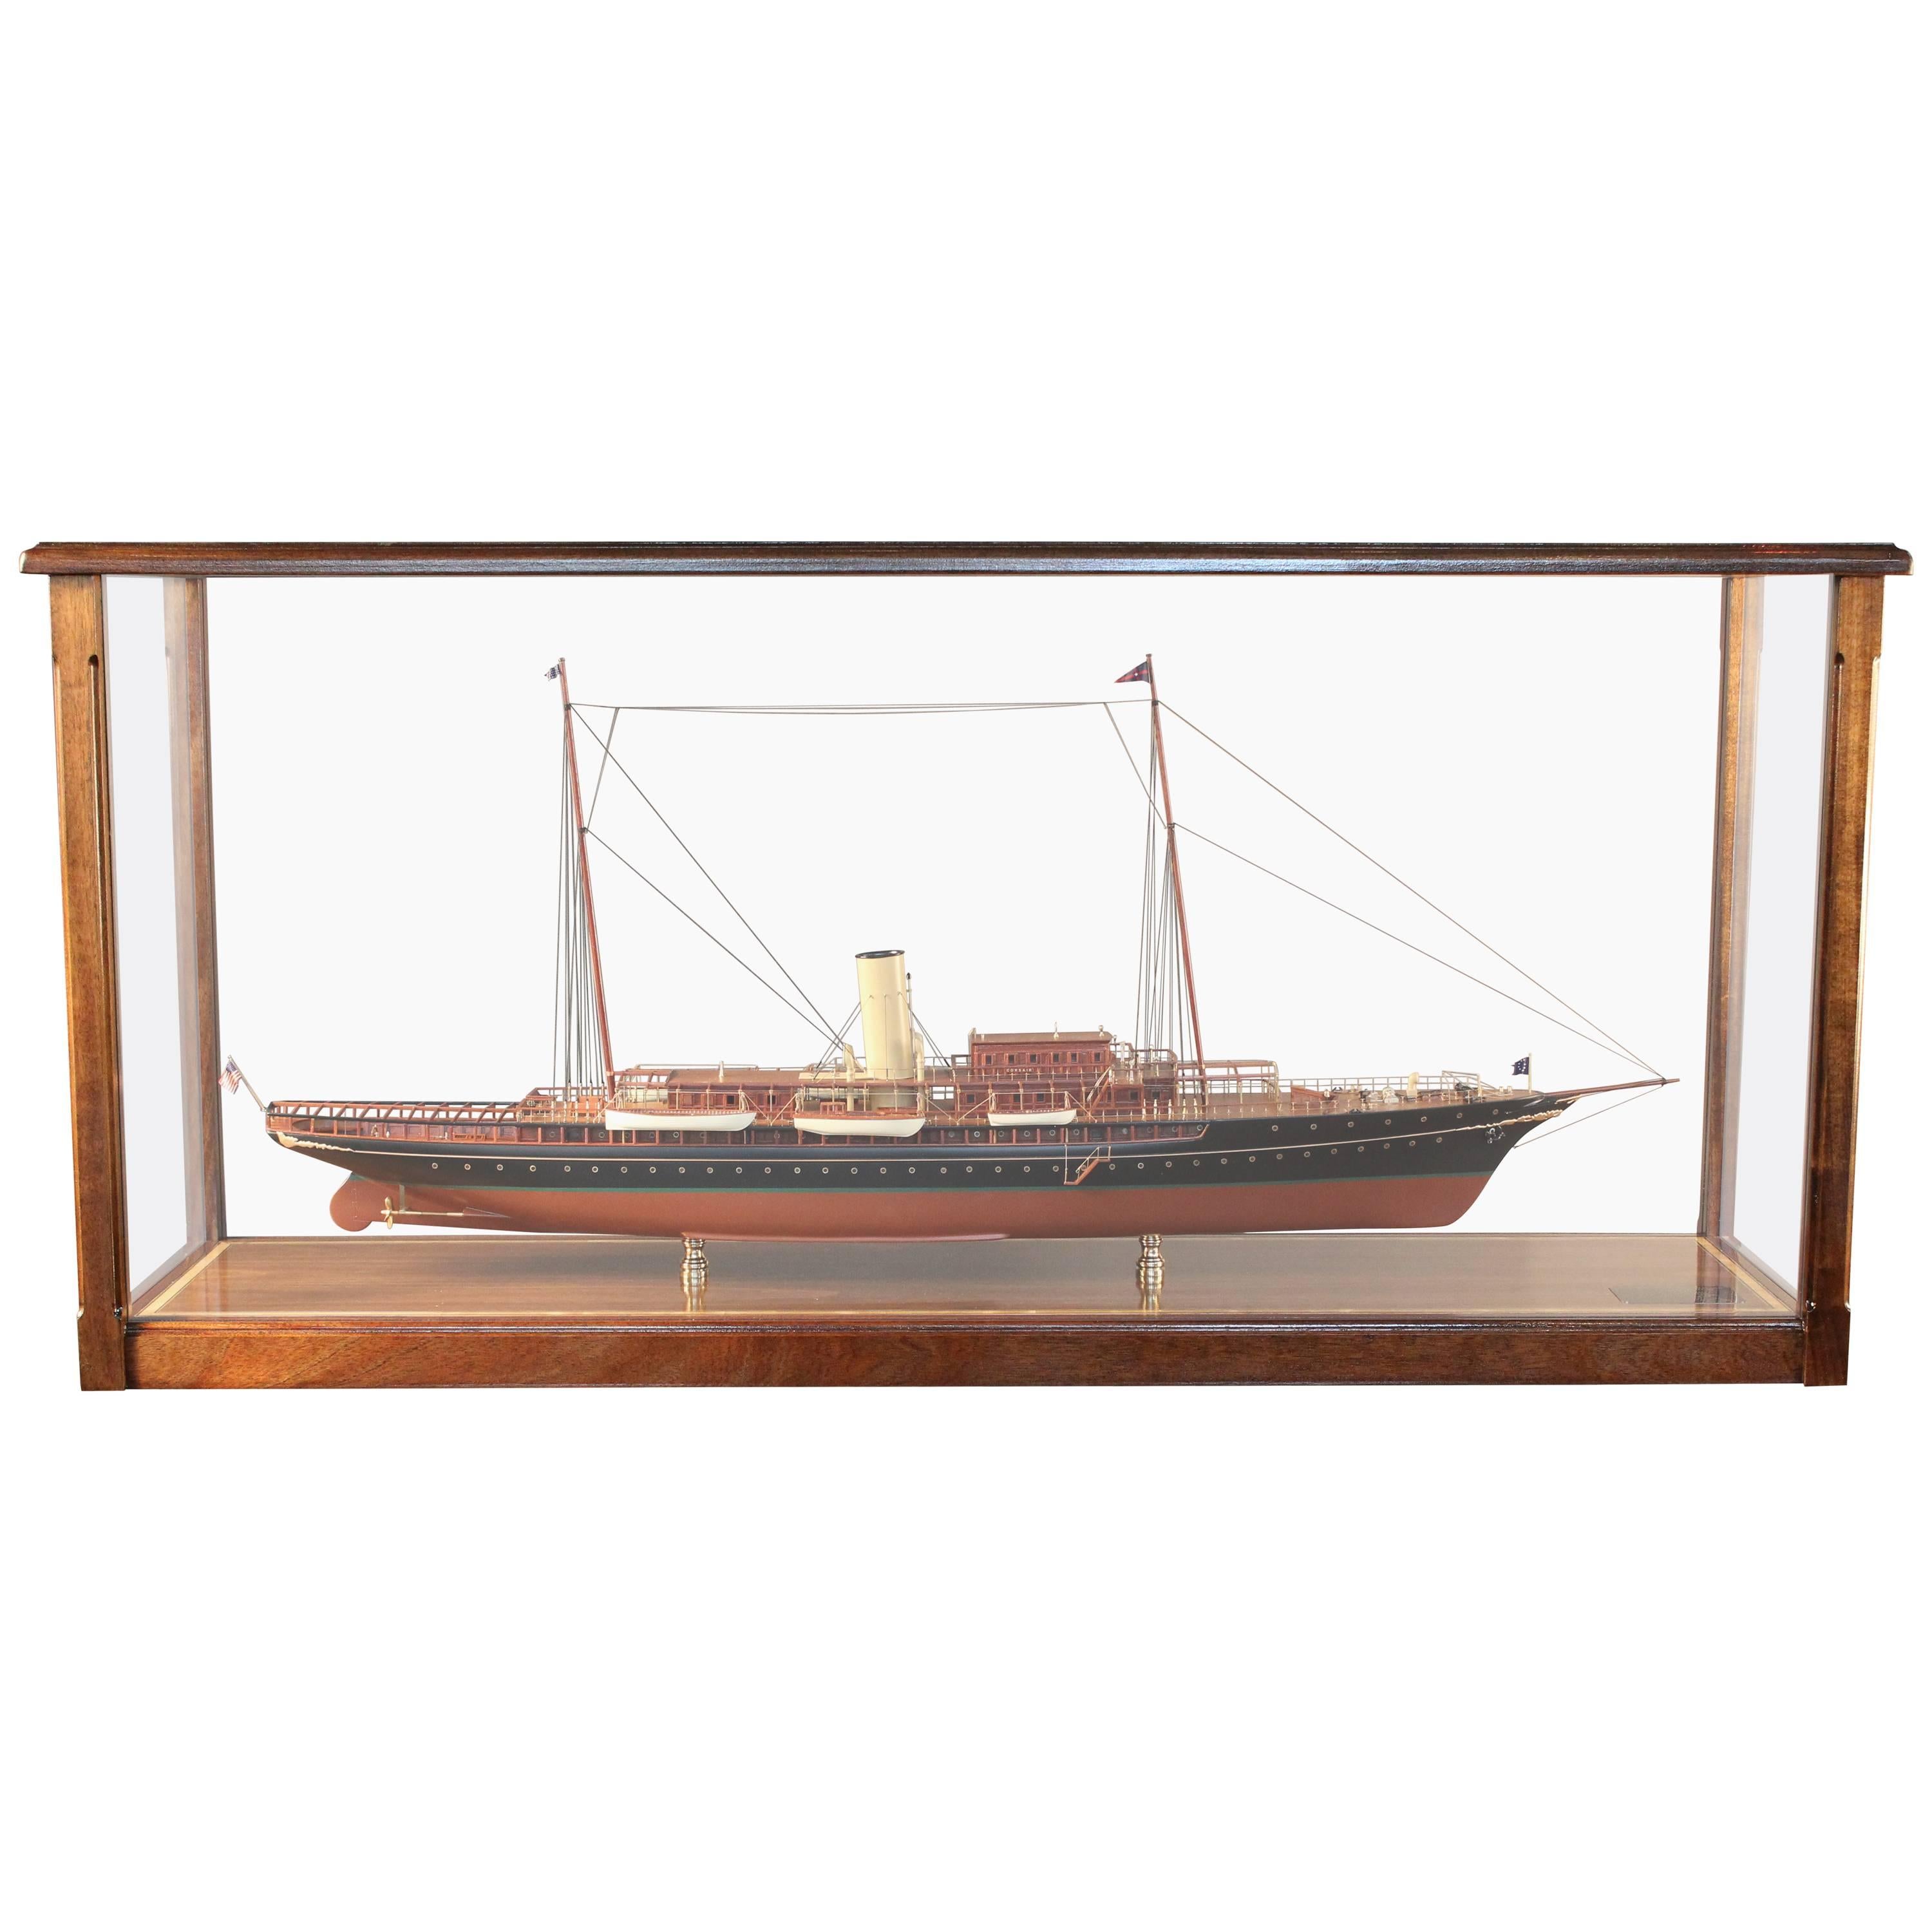 Steam Yacht "Corsair" of 1930, Ship Model in Wood Display Case with Table For Sale